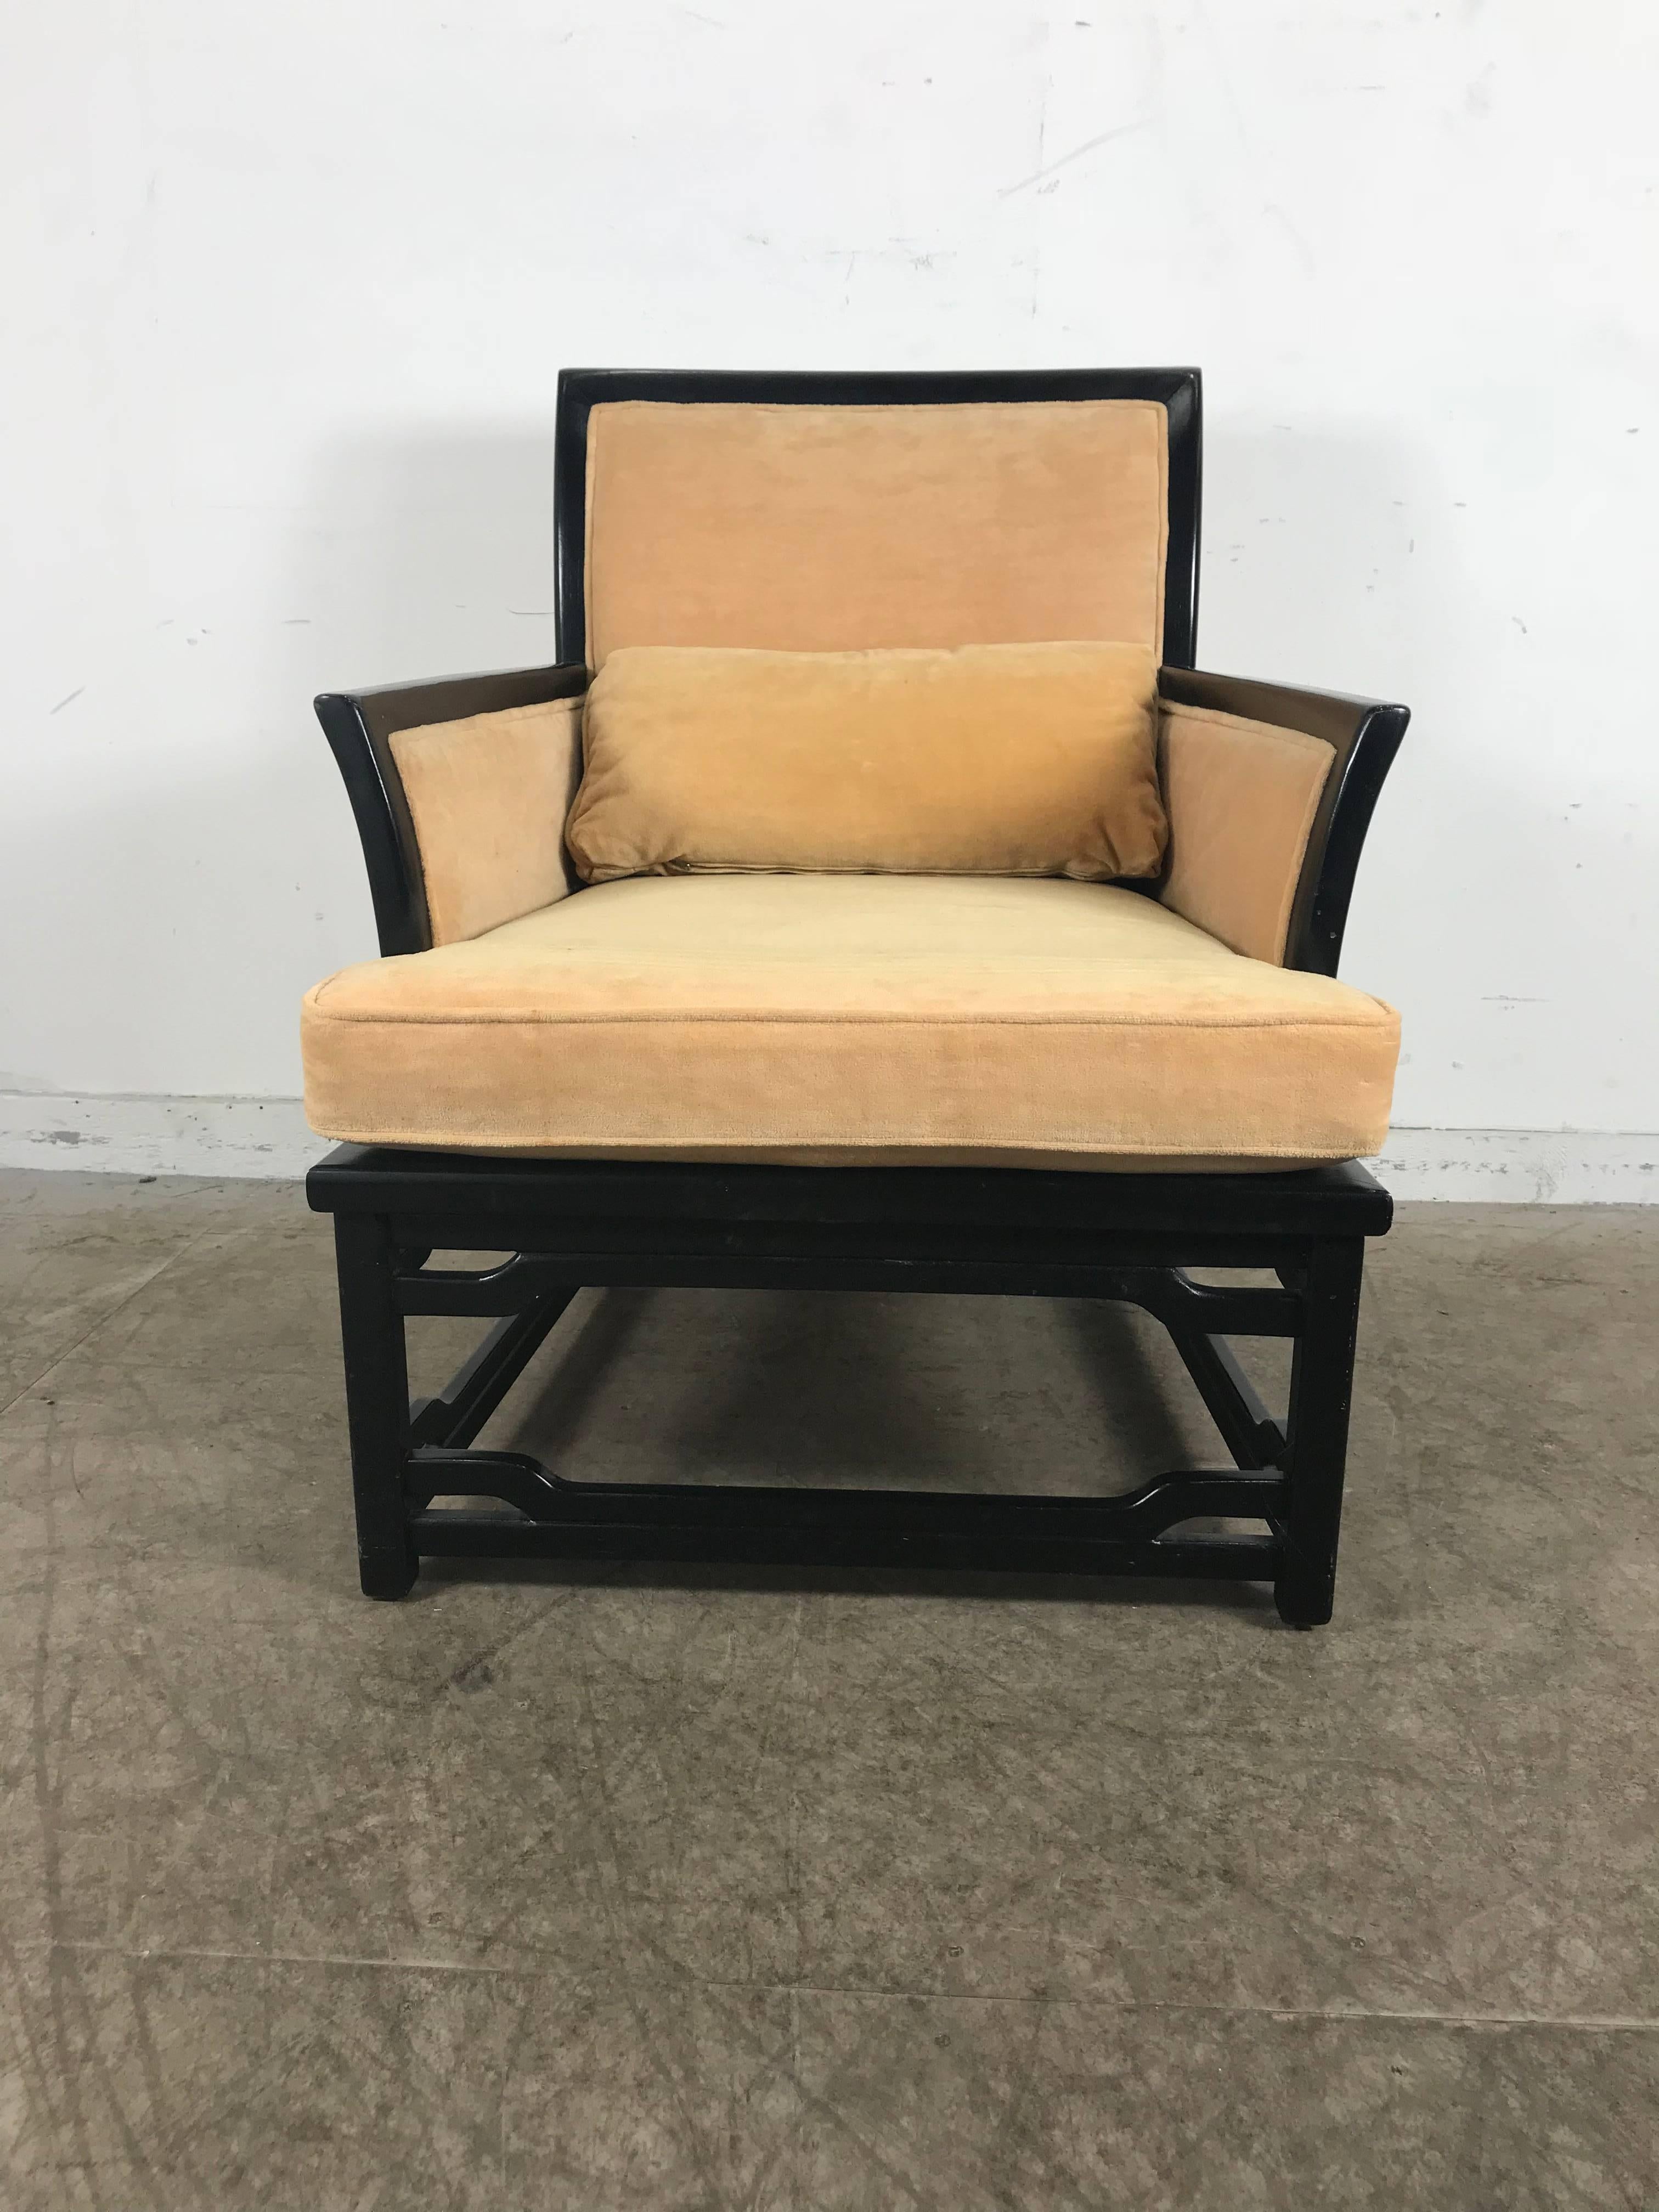 Black lacquer and velvet Asian inspired armchair by Hibriten in the style of James Mont, Stylish and comfortable. Hand delivery avail to New York City or anywhere en route from Buffalo NY.